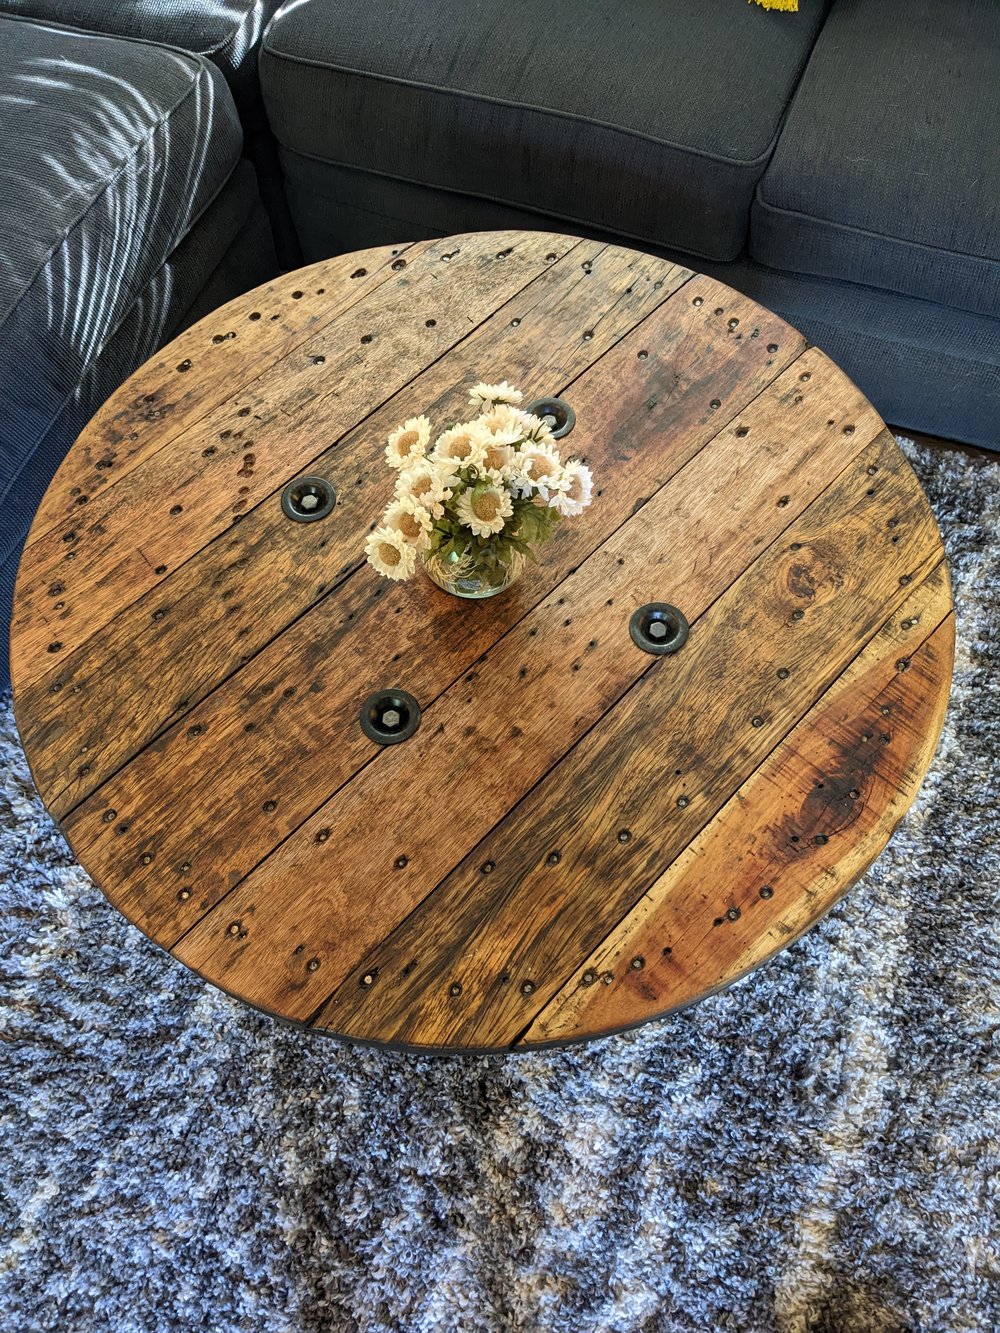 Upcycled Coffee Table, After! All you need is a fun yarn an…